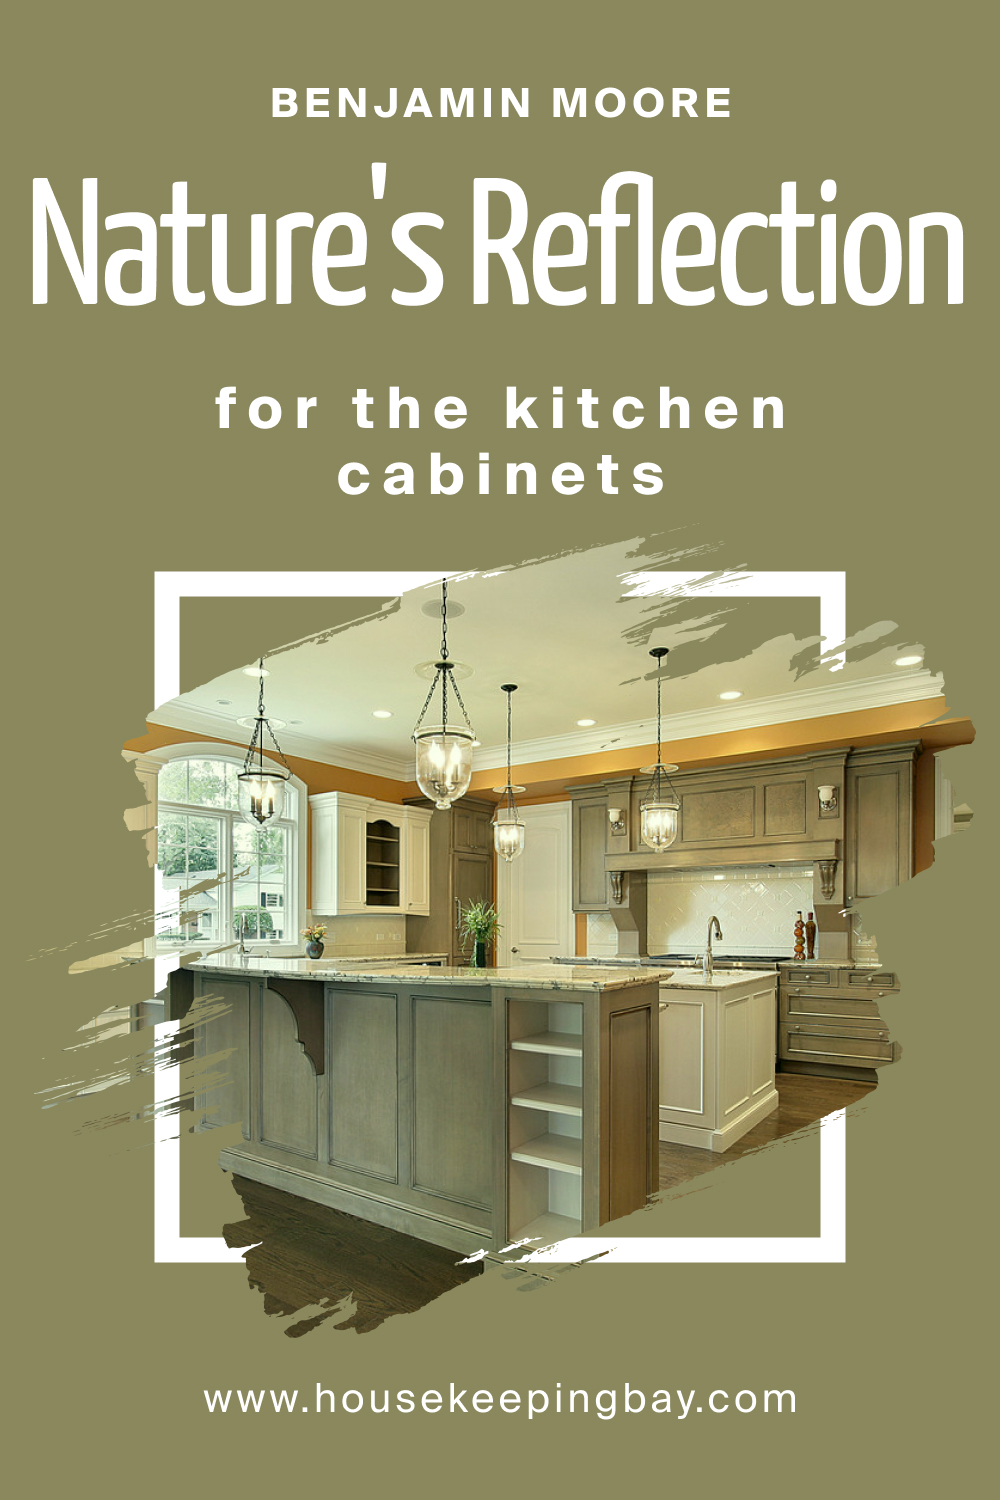 How to Use BM Nature's Reflection 504 on Kitchen Cabinets?